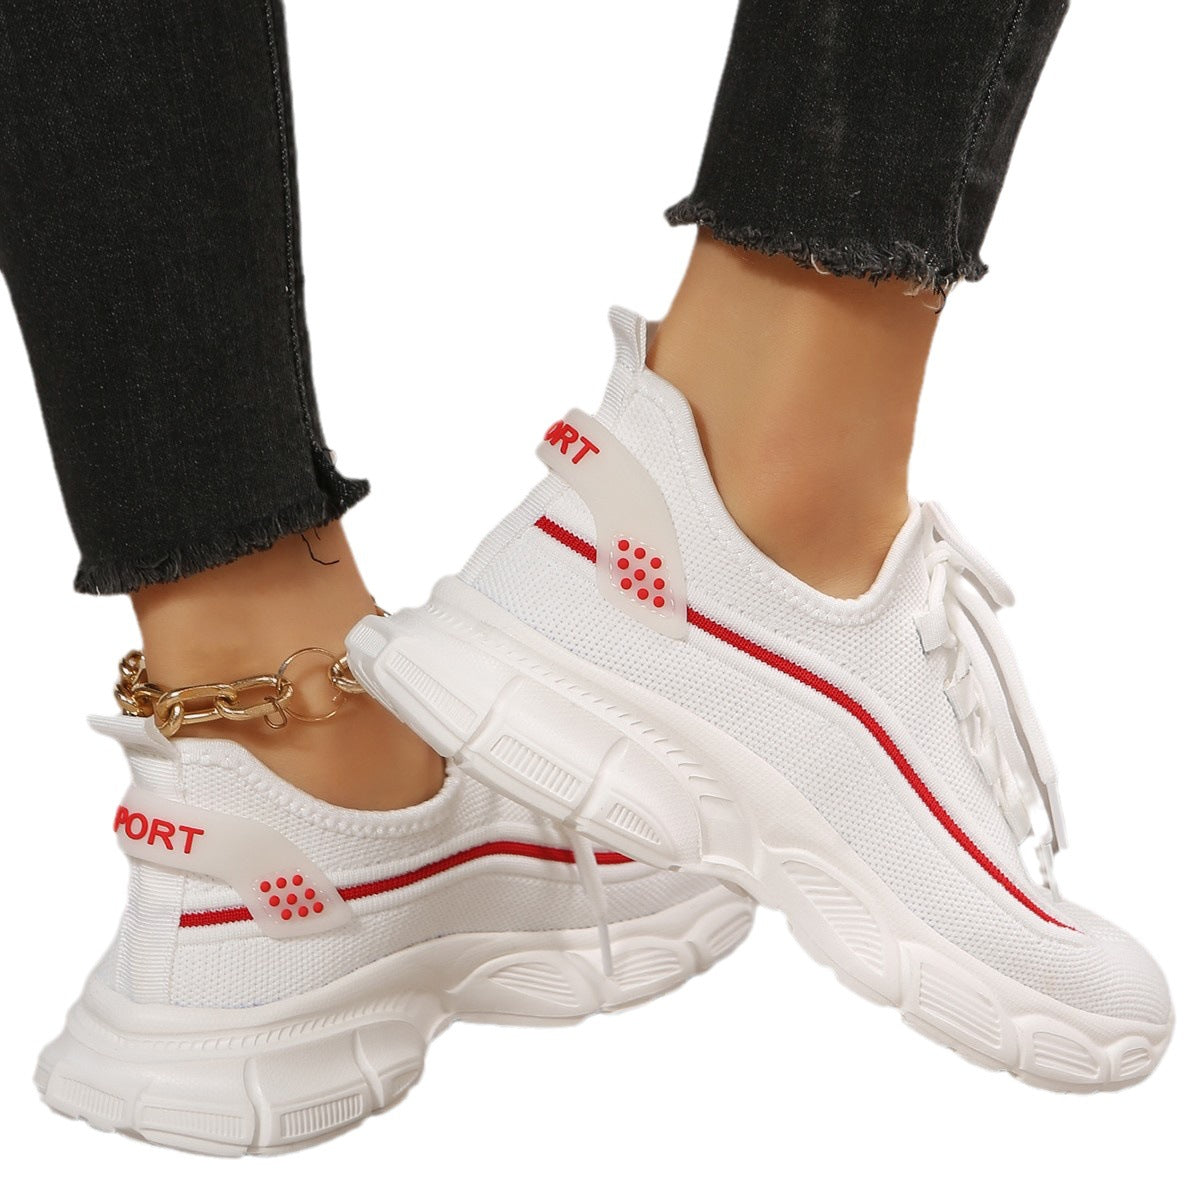 Women's Fashion Casual Exercise Shoes